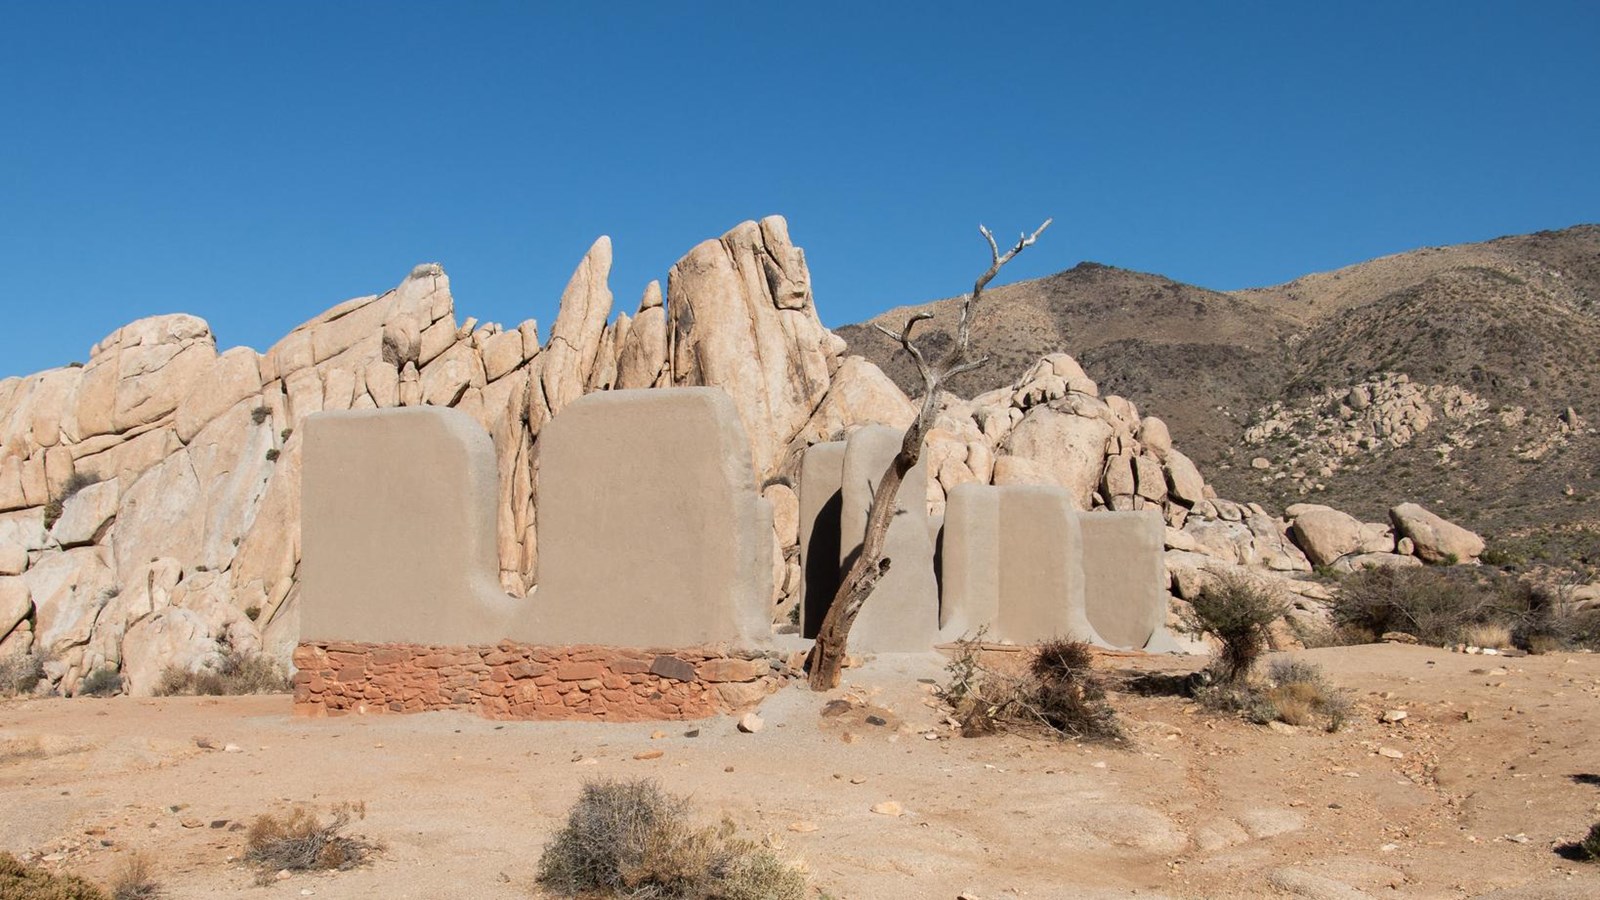 A historic adobe type structure with boulders and a mountain in the background.